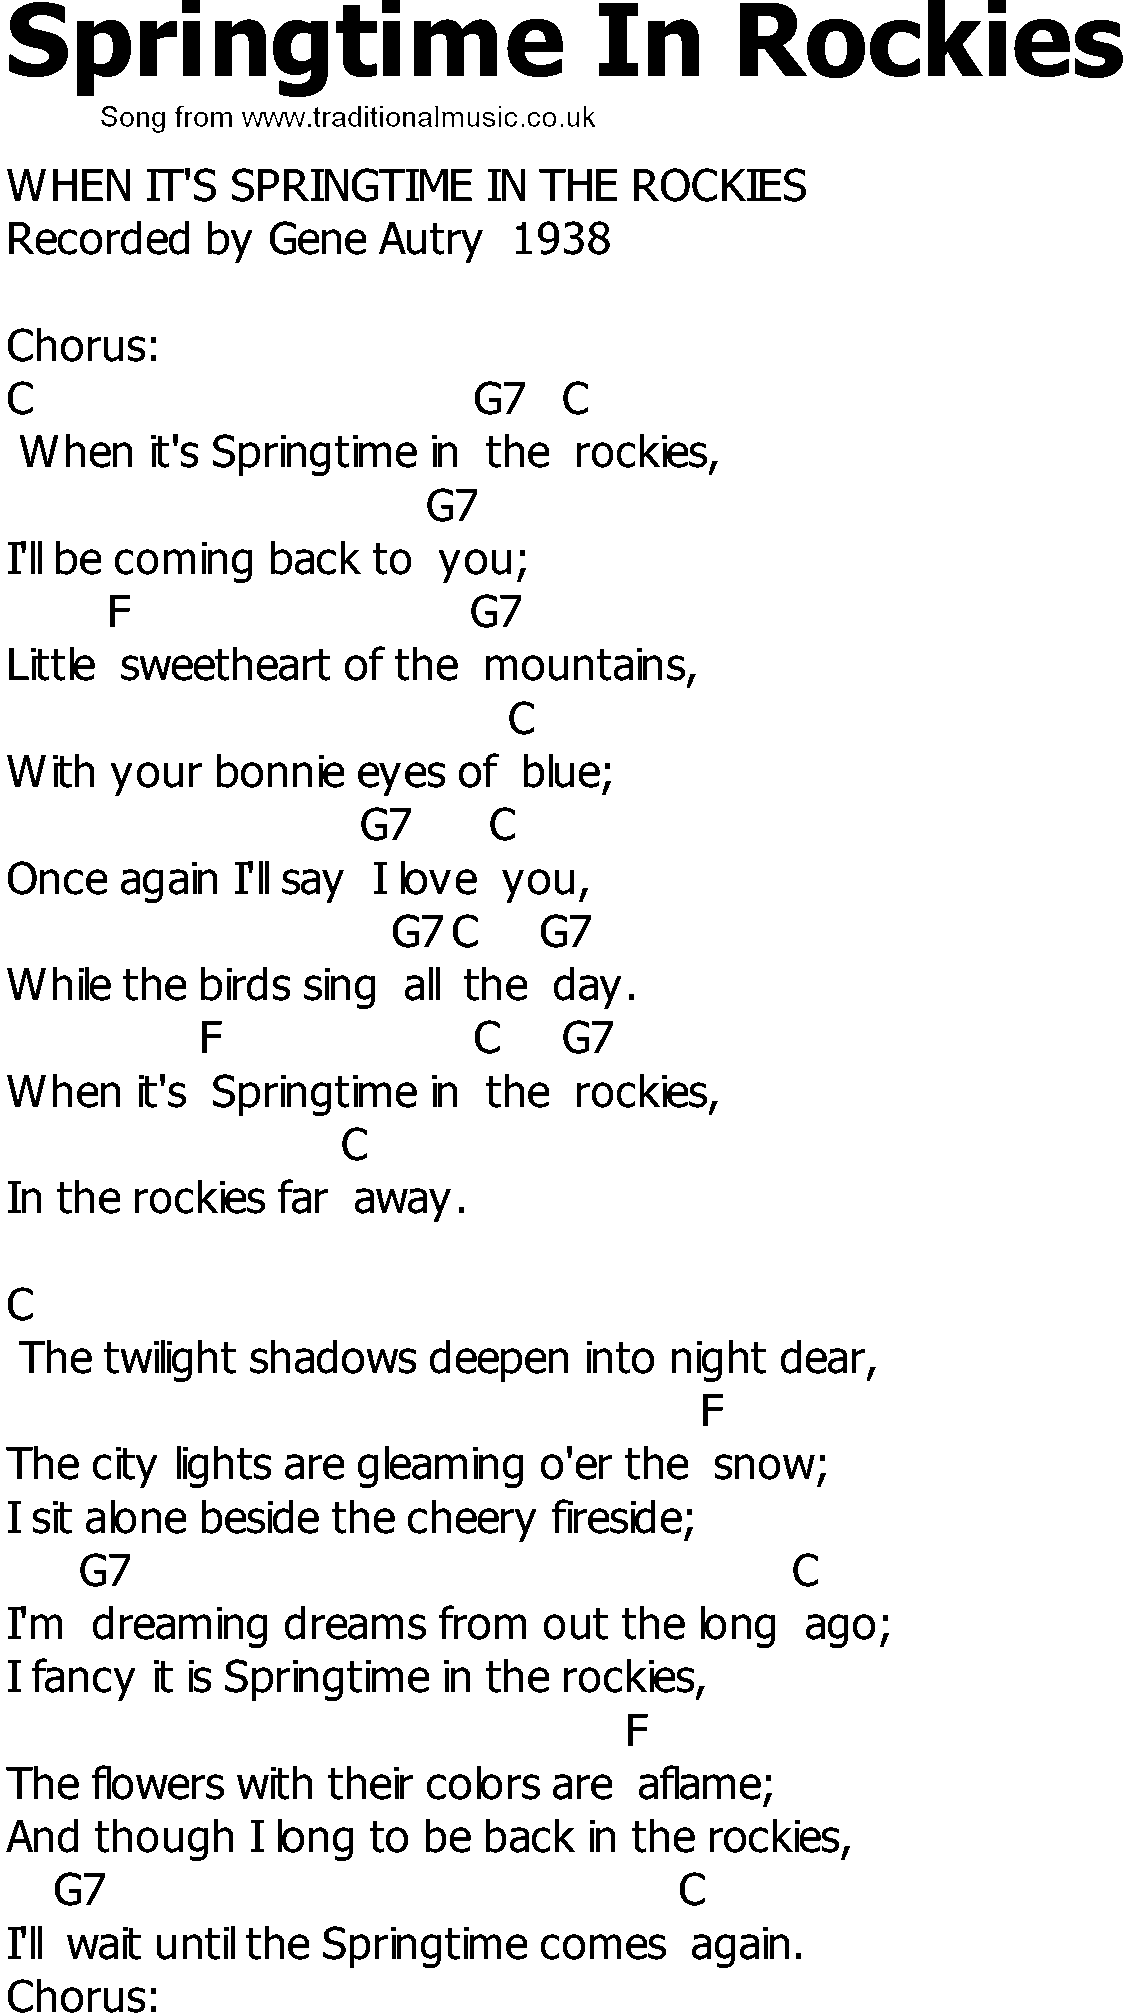 Old Country song lyrics with chords - Springtime In Rockies